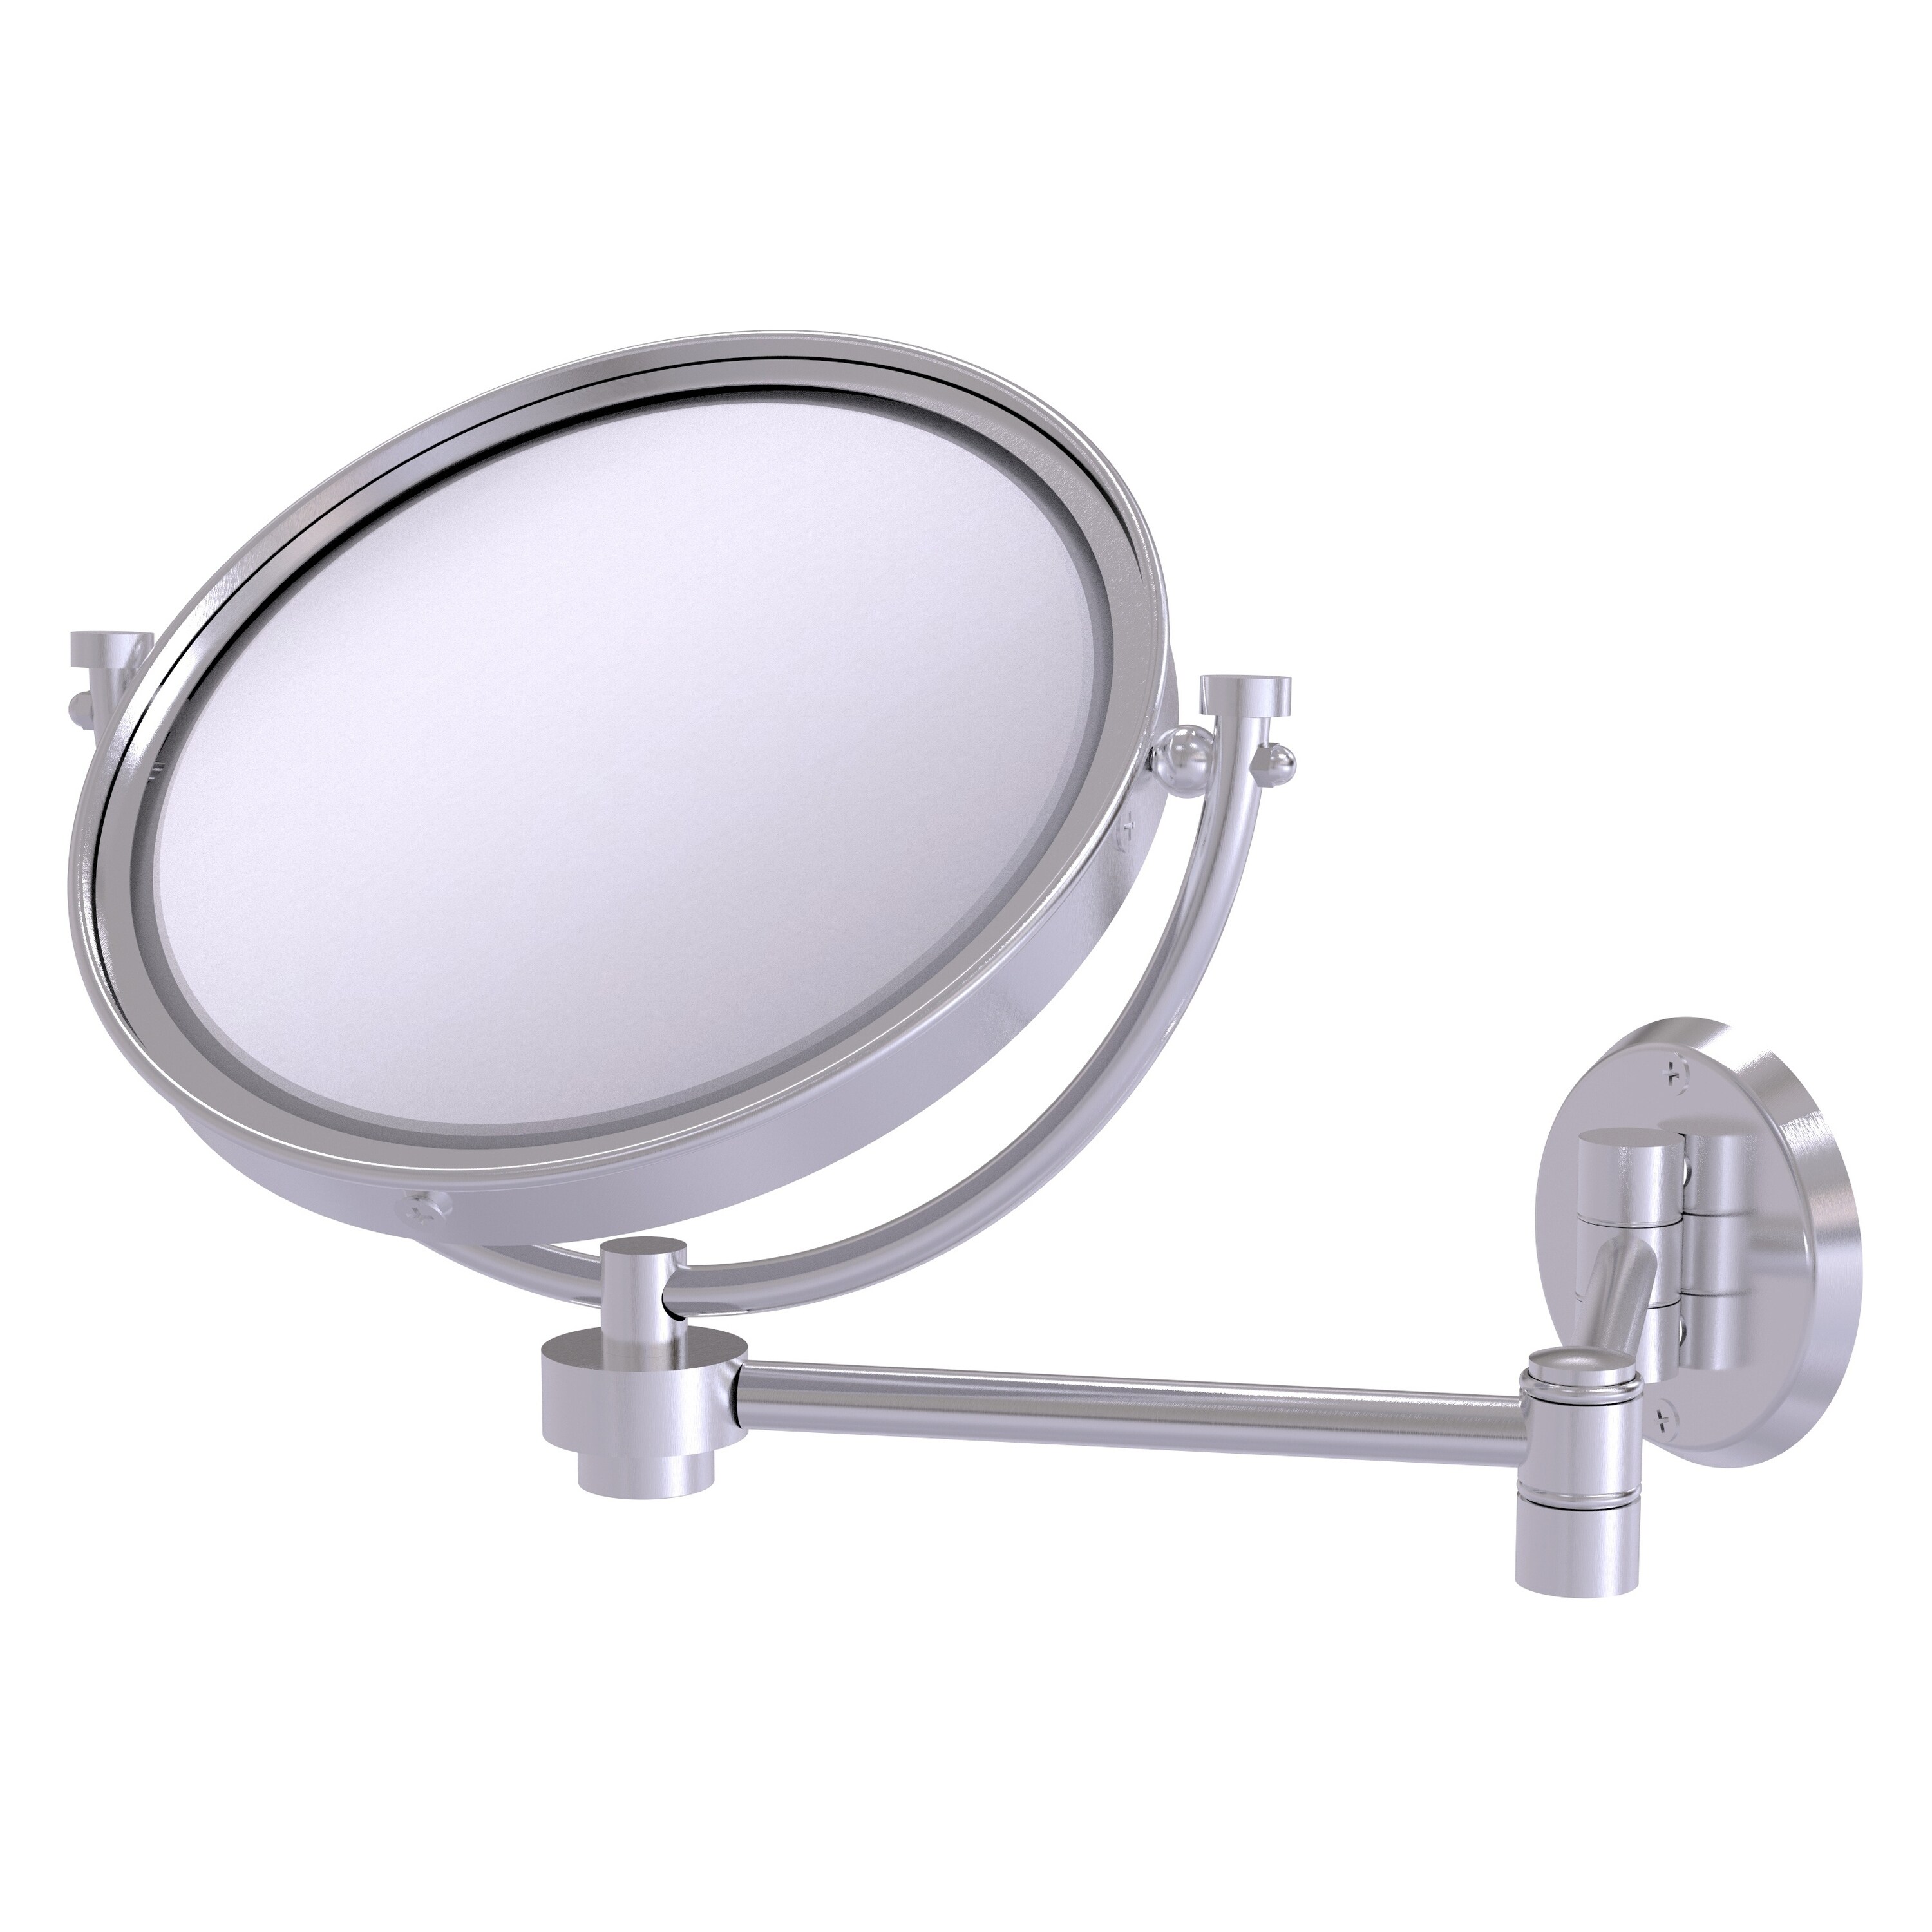 8-in x 10-in Satin Chrome Double-sided 5X Magnifying Wall-mounted Vanity Mirror | - Allied Brass WM-6/4X-SCH